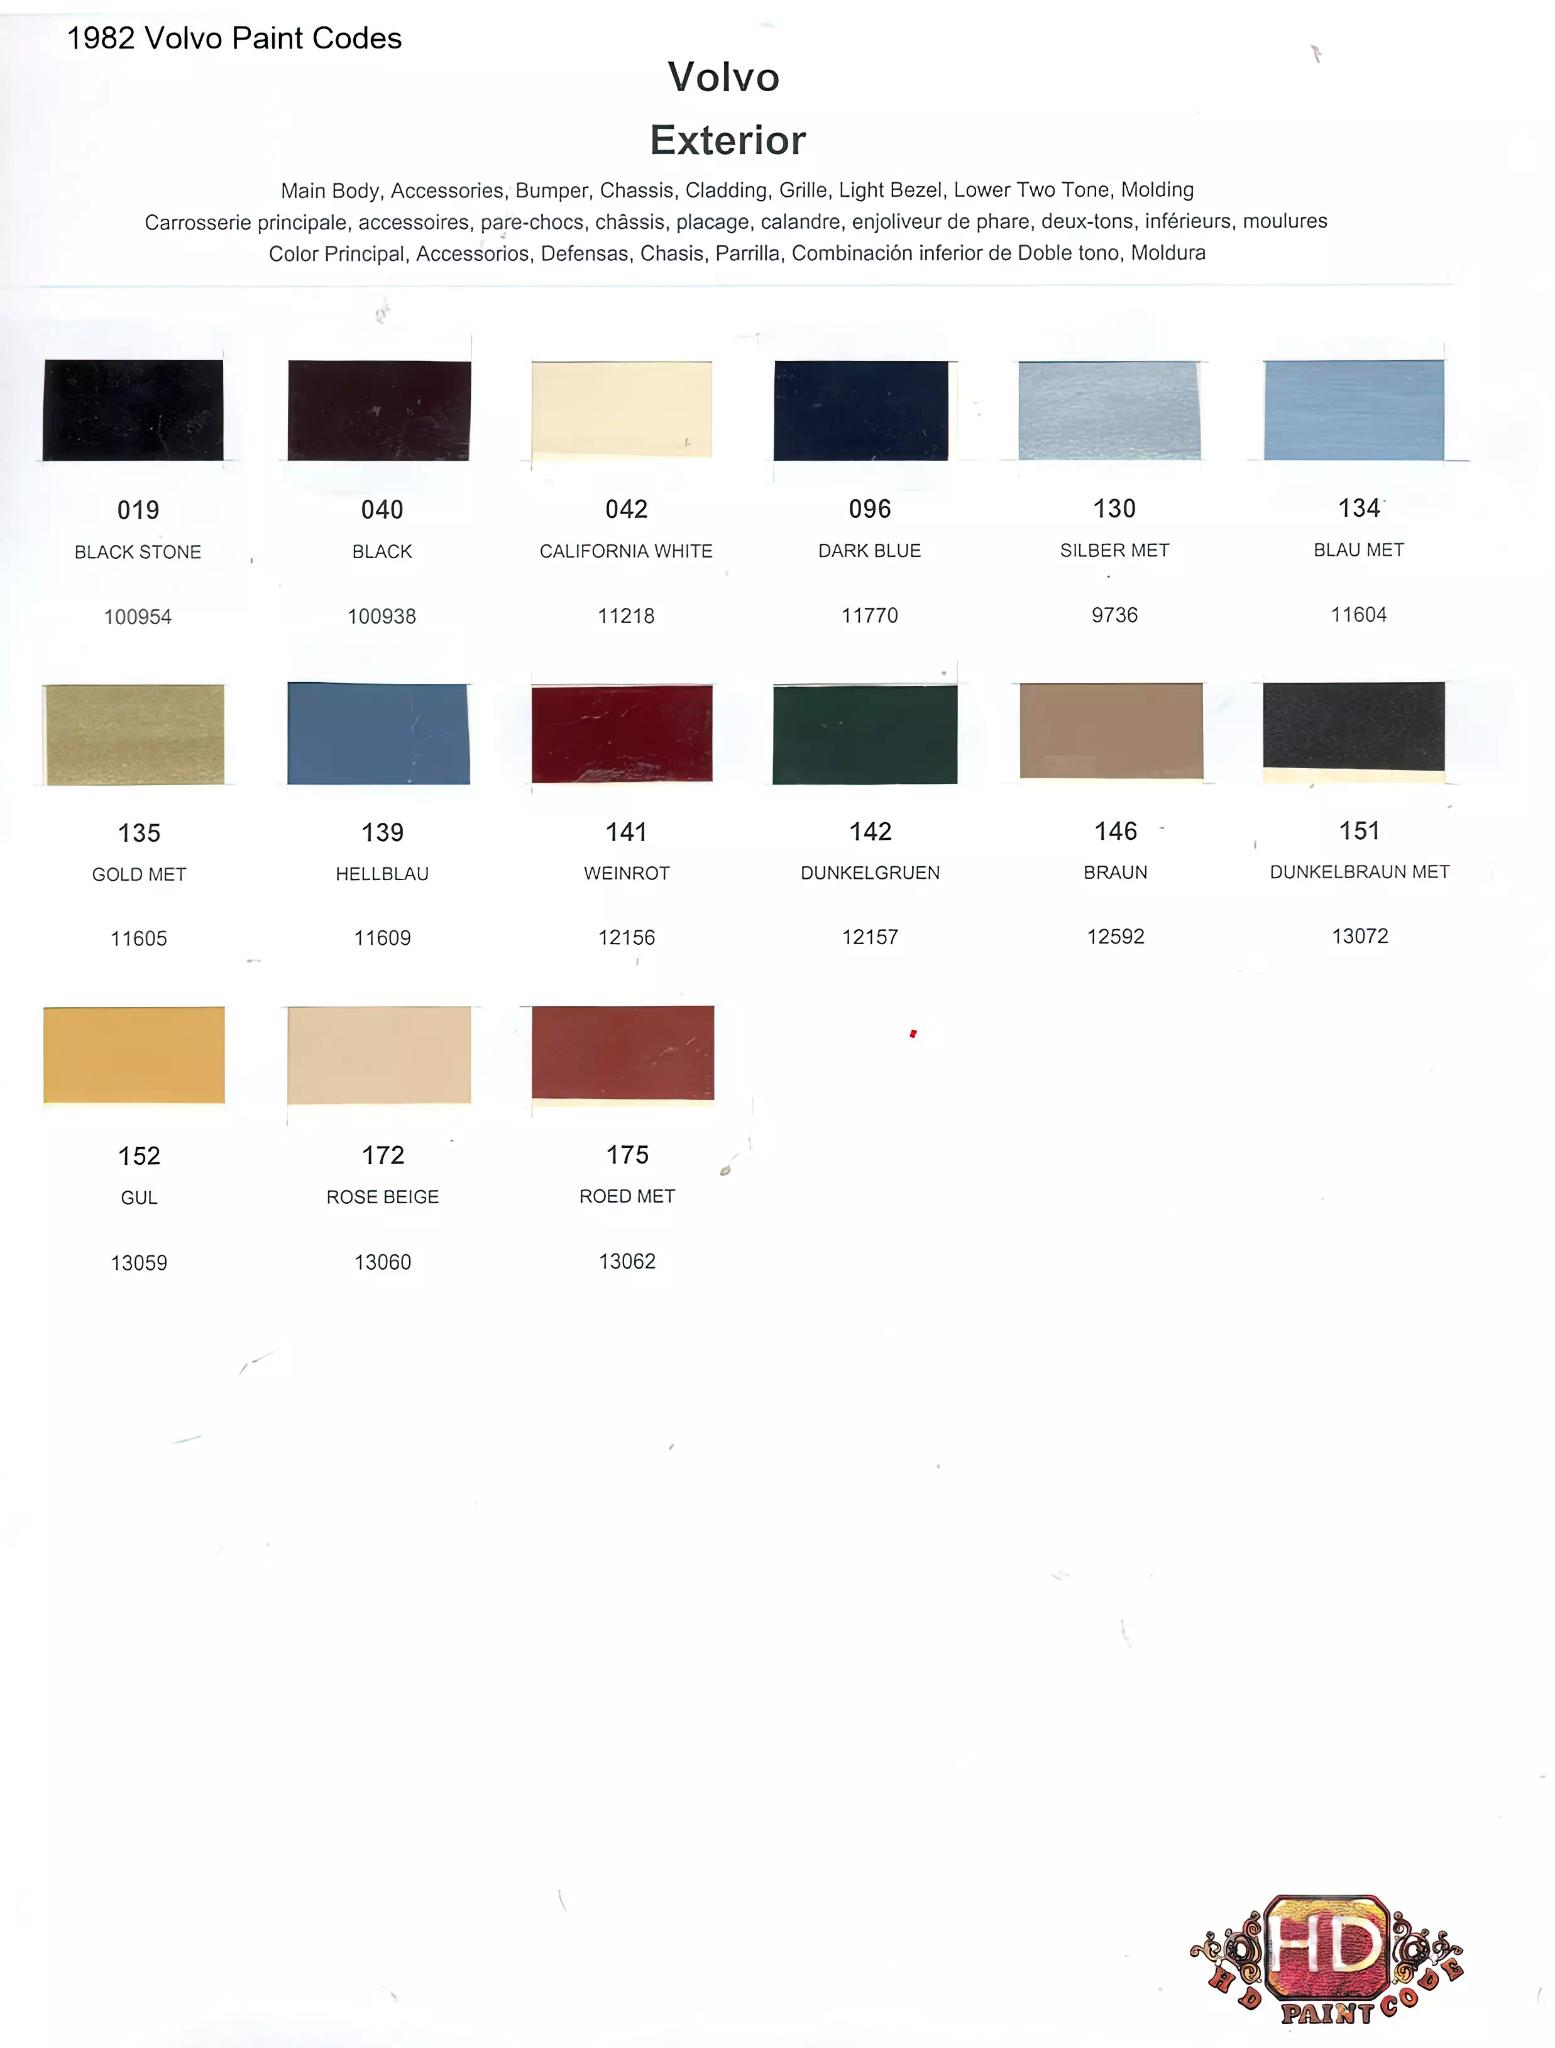 Oem numbers, Color names, rm and Glasurit stock numbers and color shade examples for 1982 Volvo exterior Paint Colors